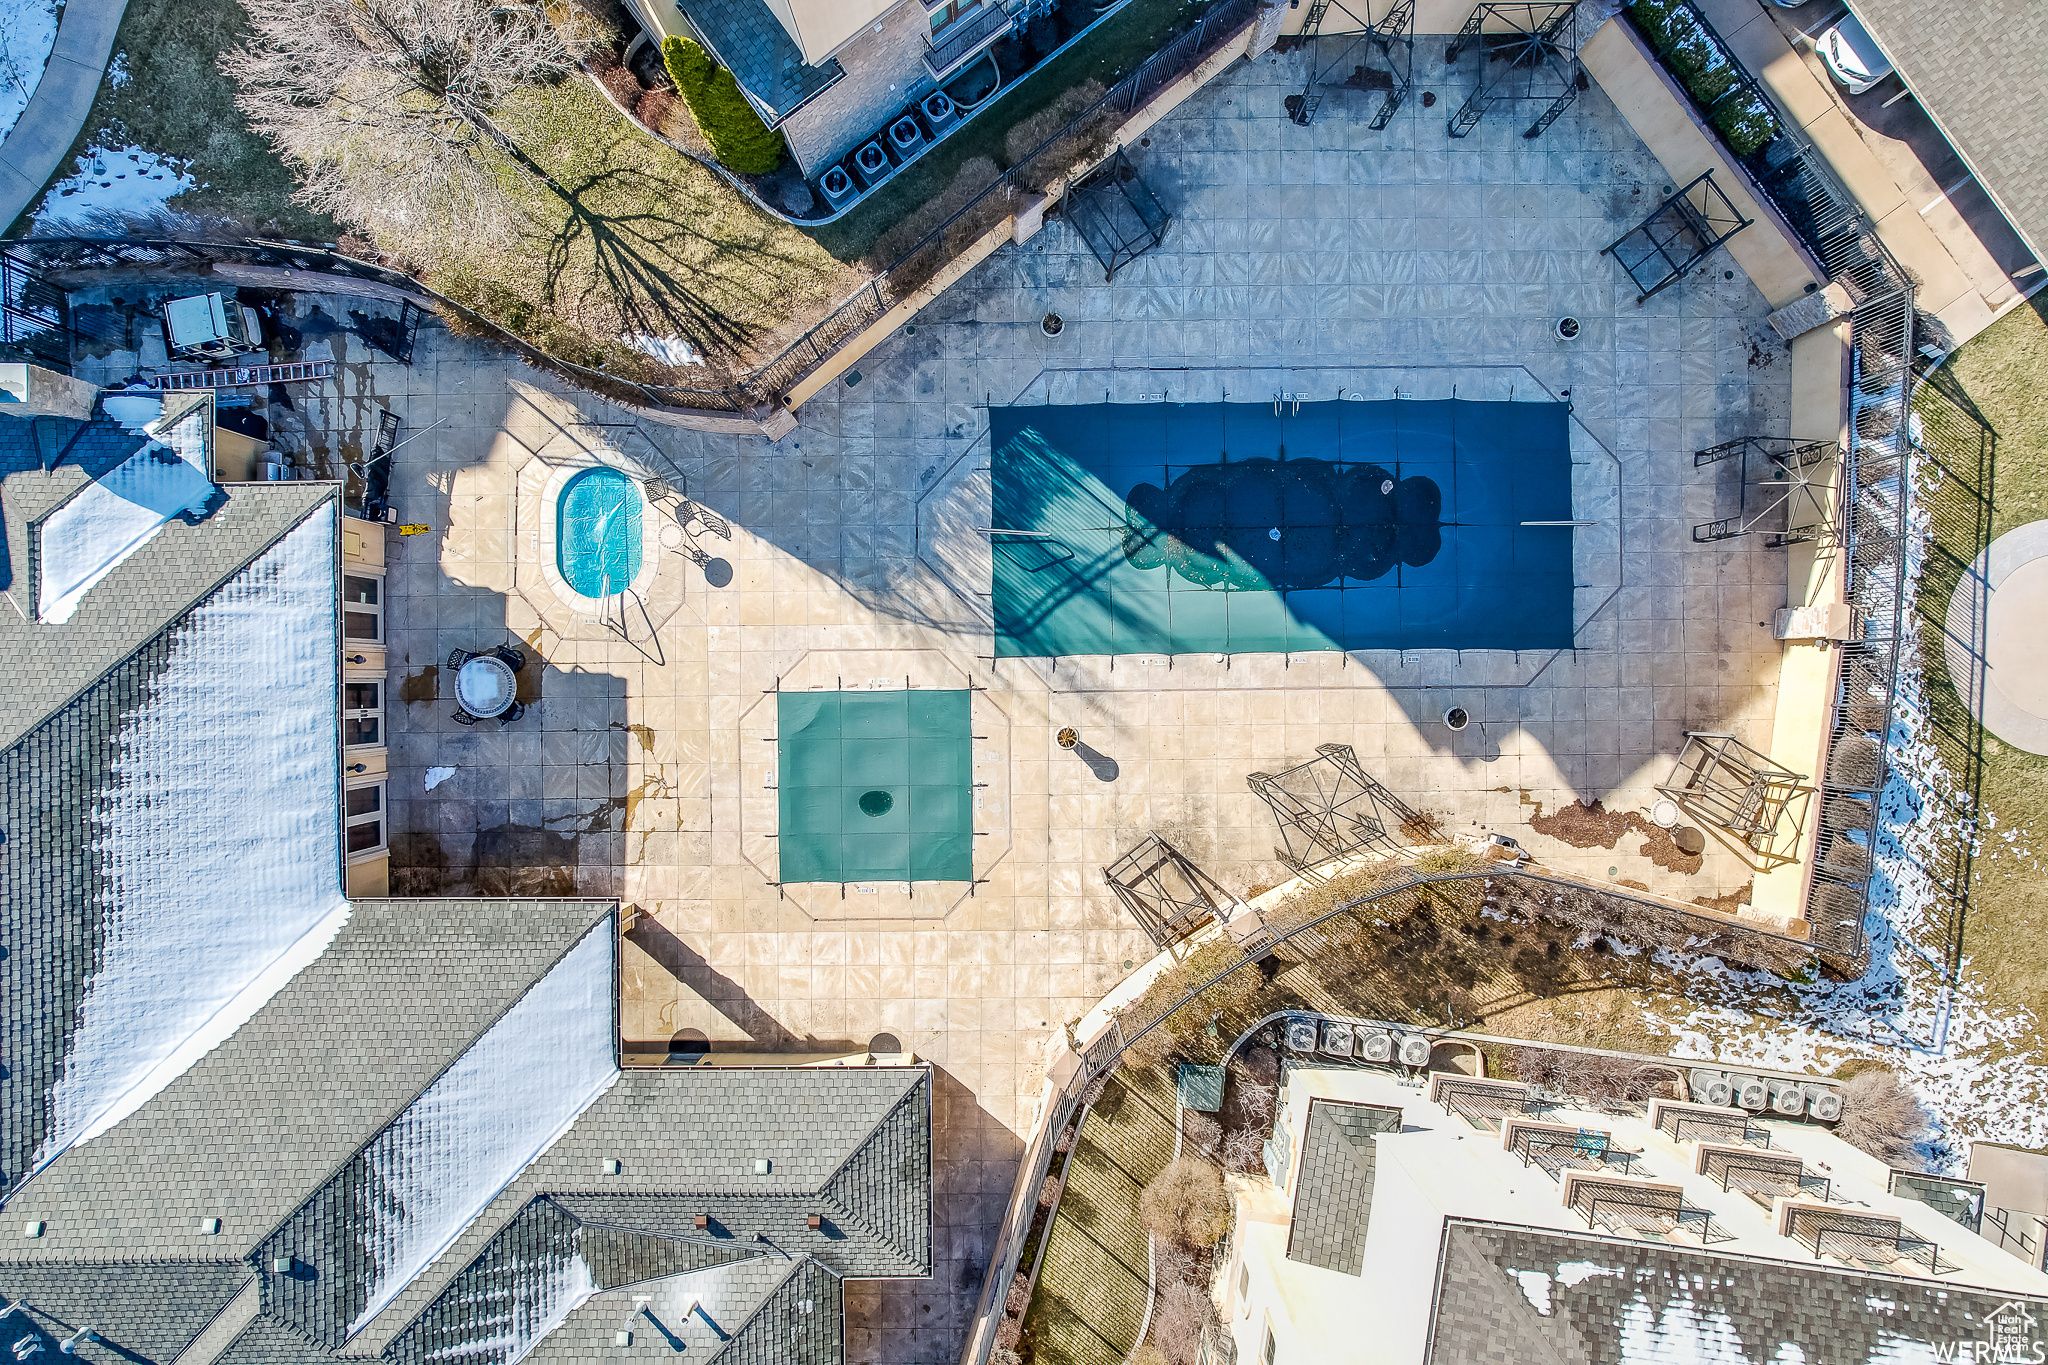 Pool area from above (winter pic)